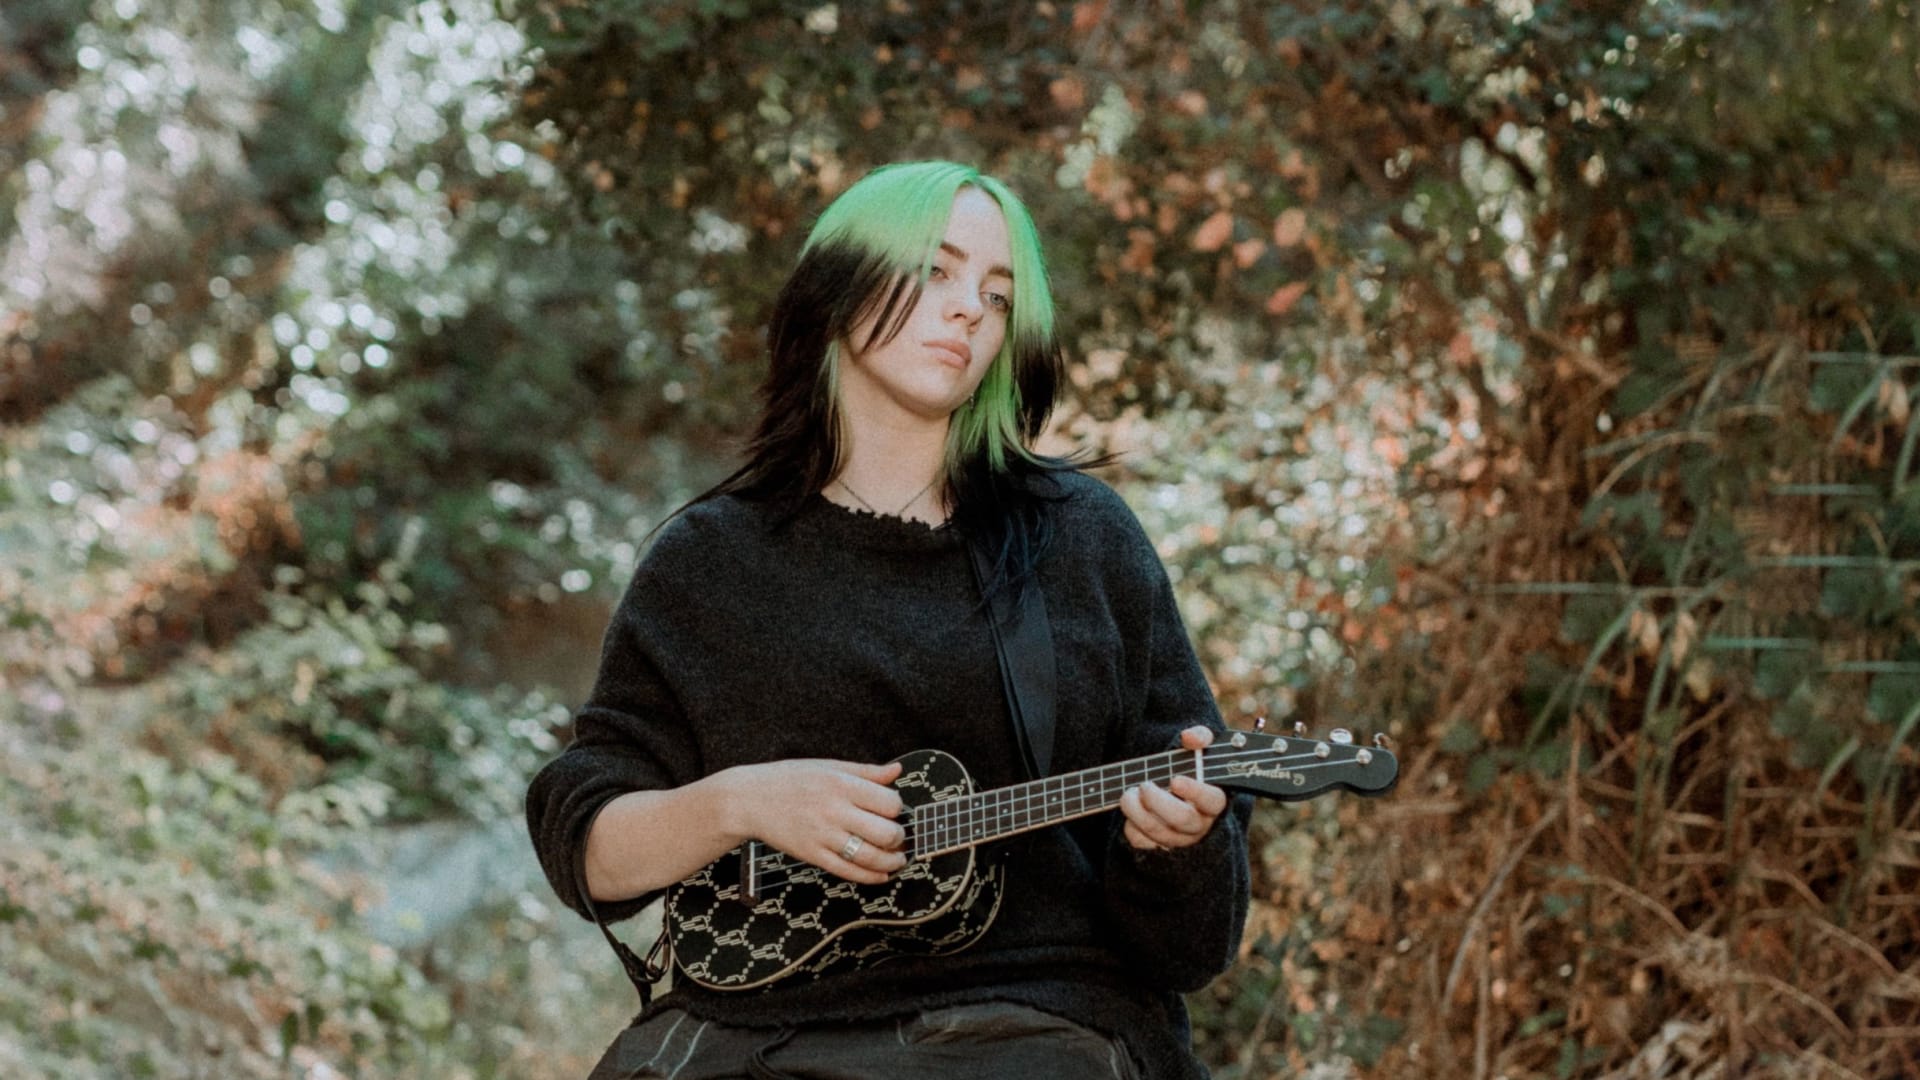 It’s a string thing. Billie Eilish learned to play-- 16 million people want to join her.